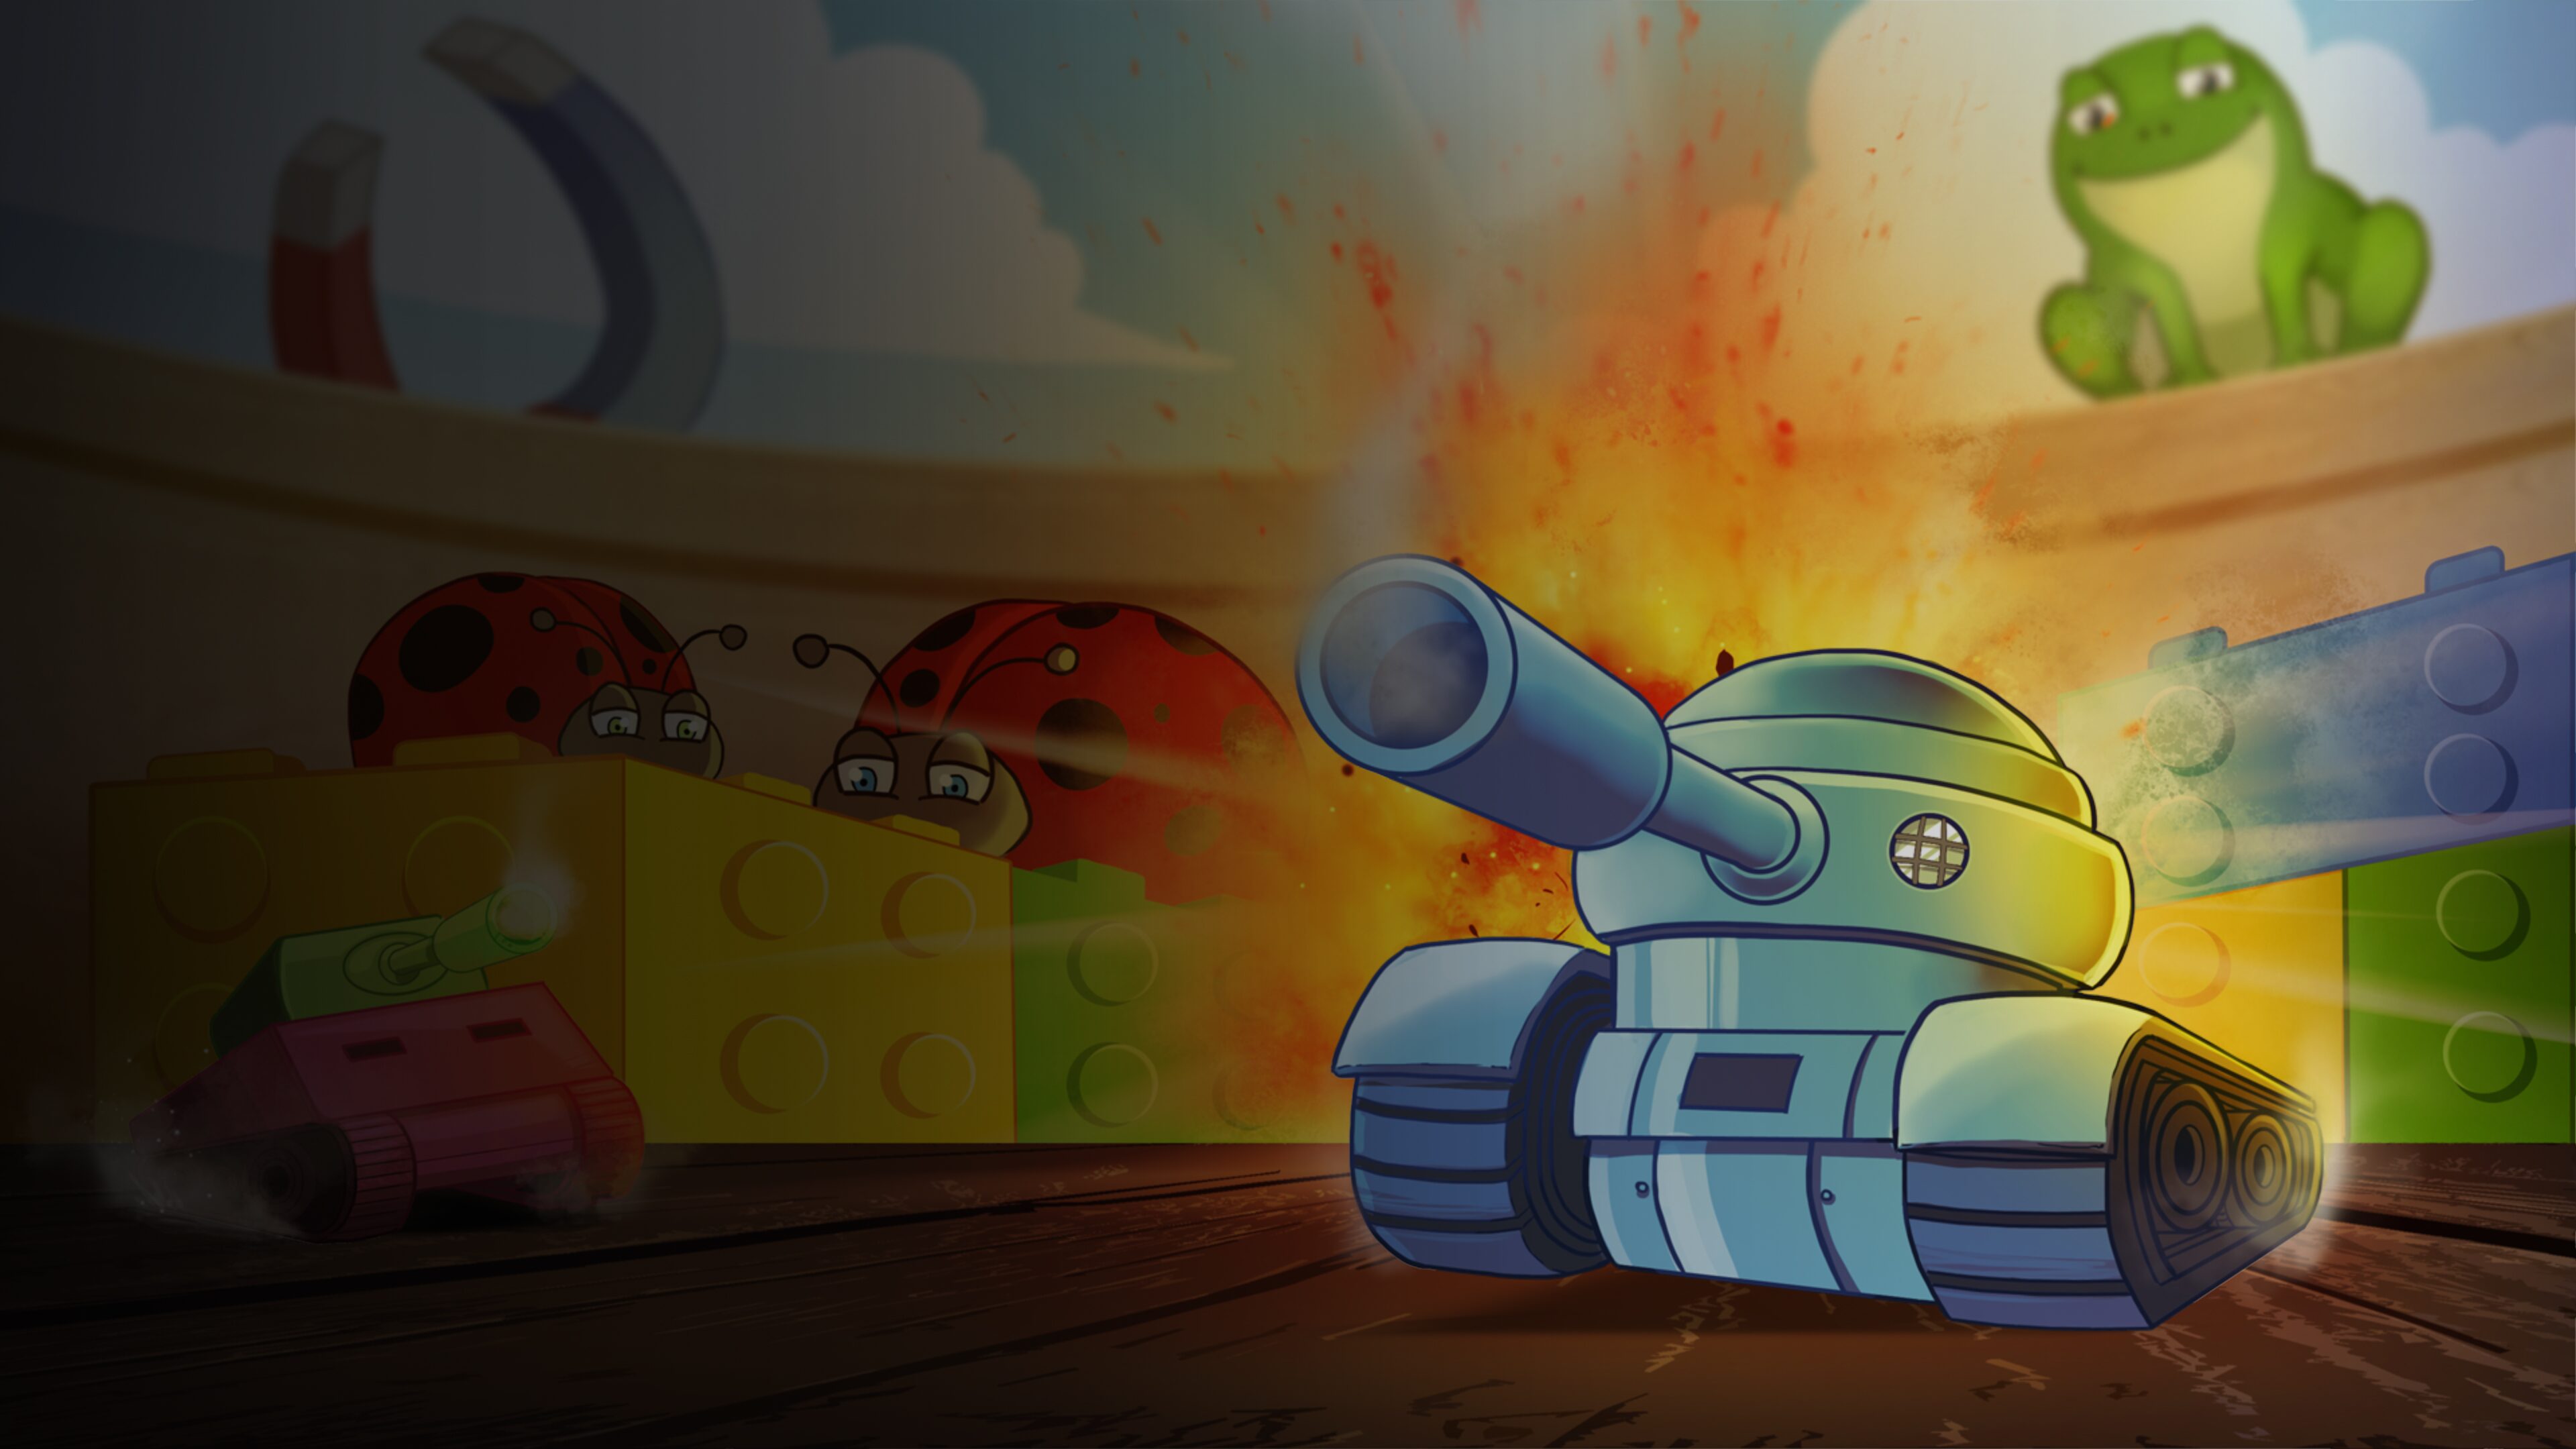 Attack of the Toy Tanks!